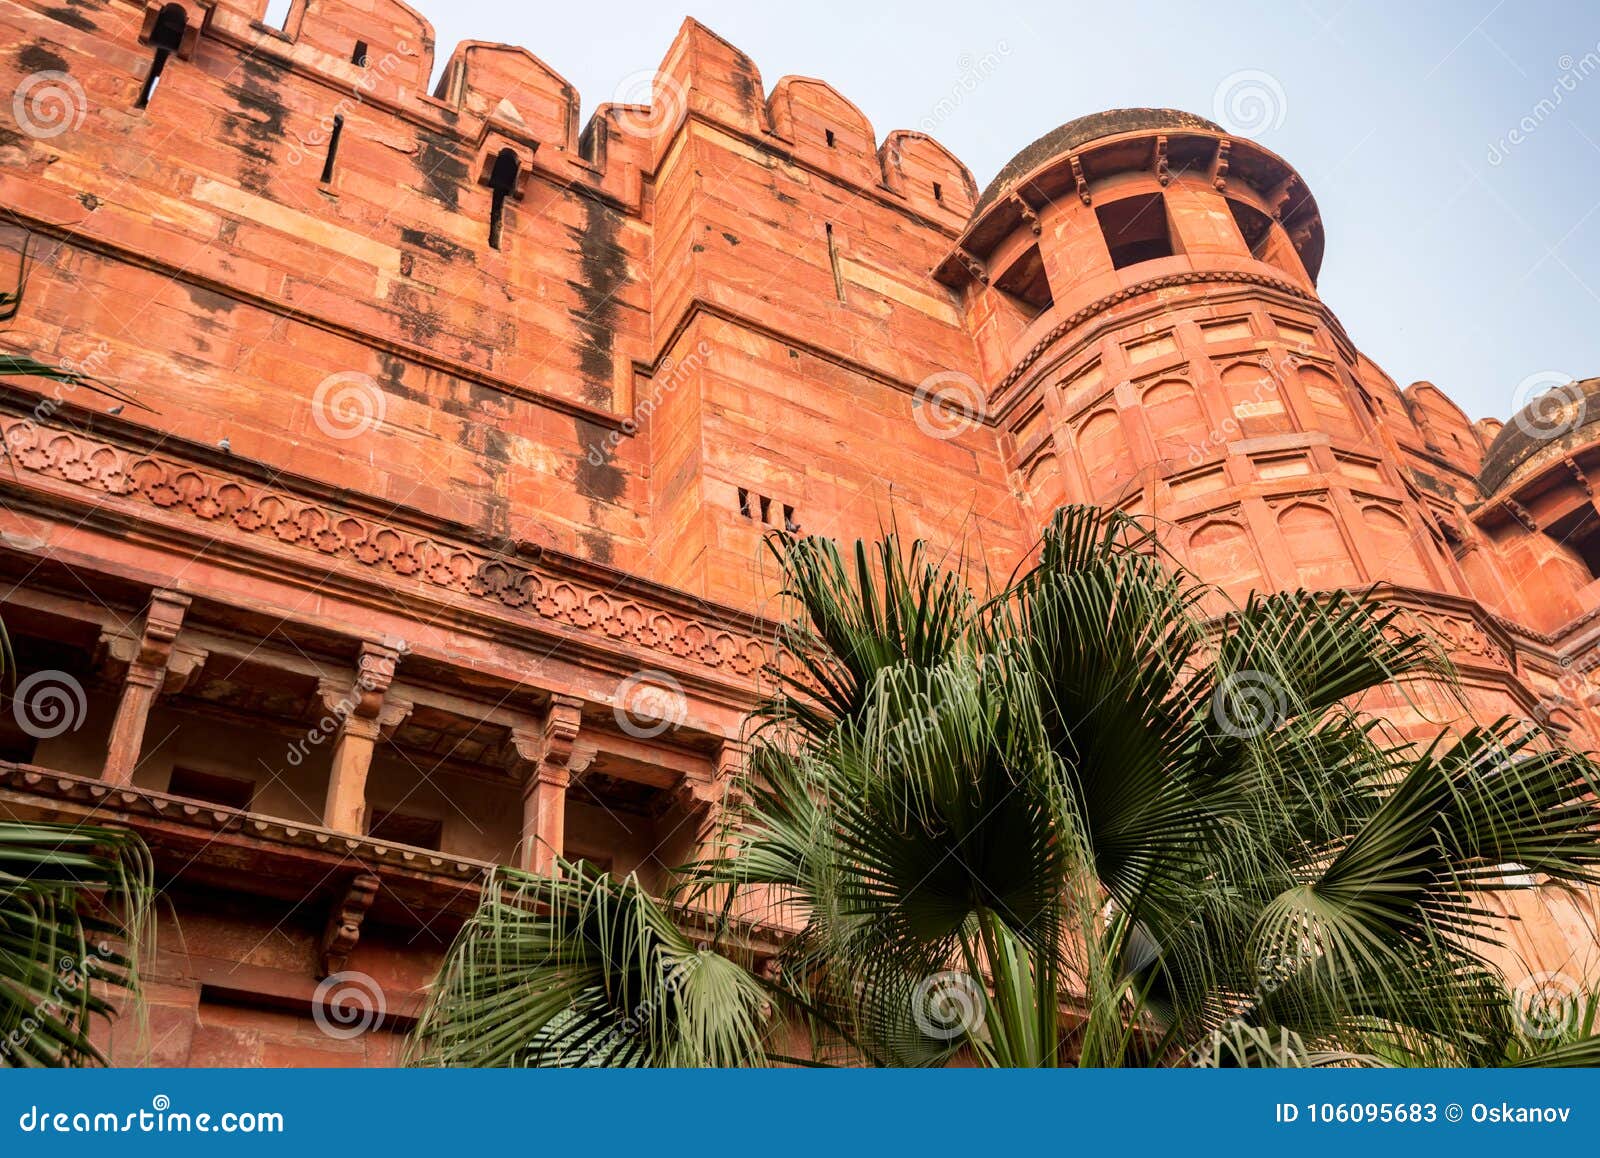 Red Fort Situated In Agra India Stock Image Image Of Landmark